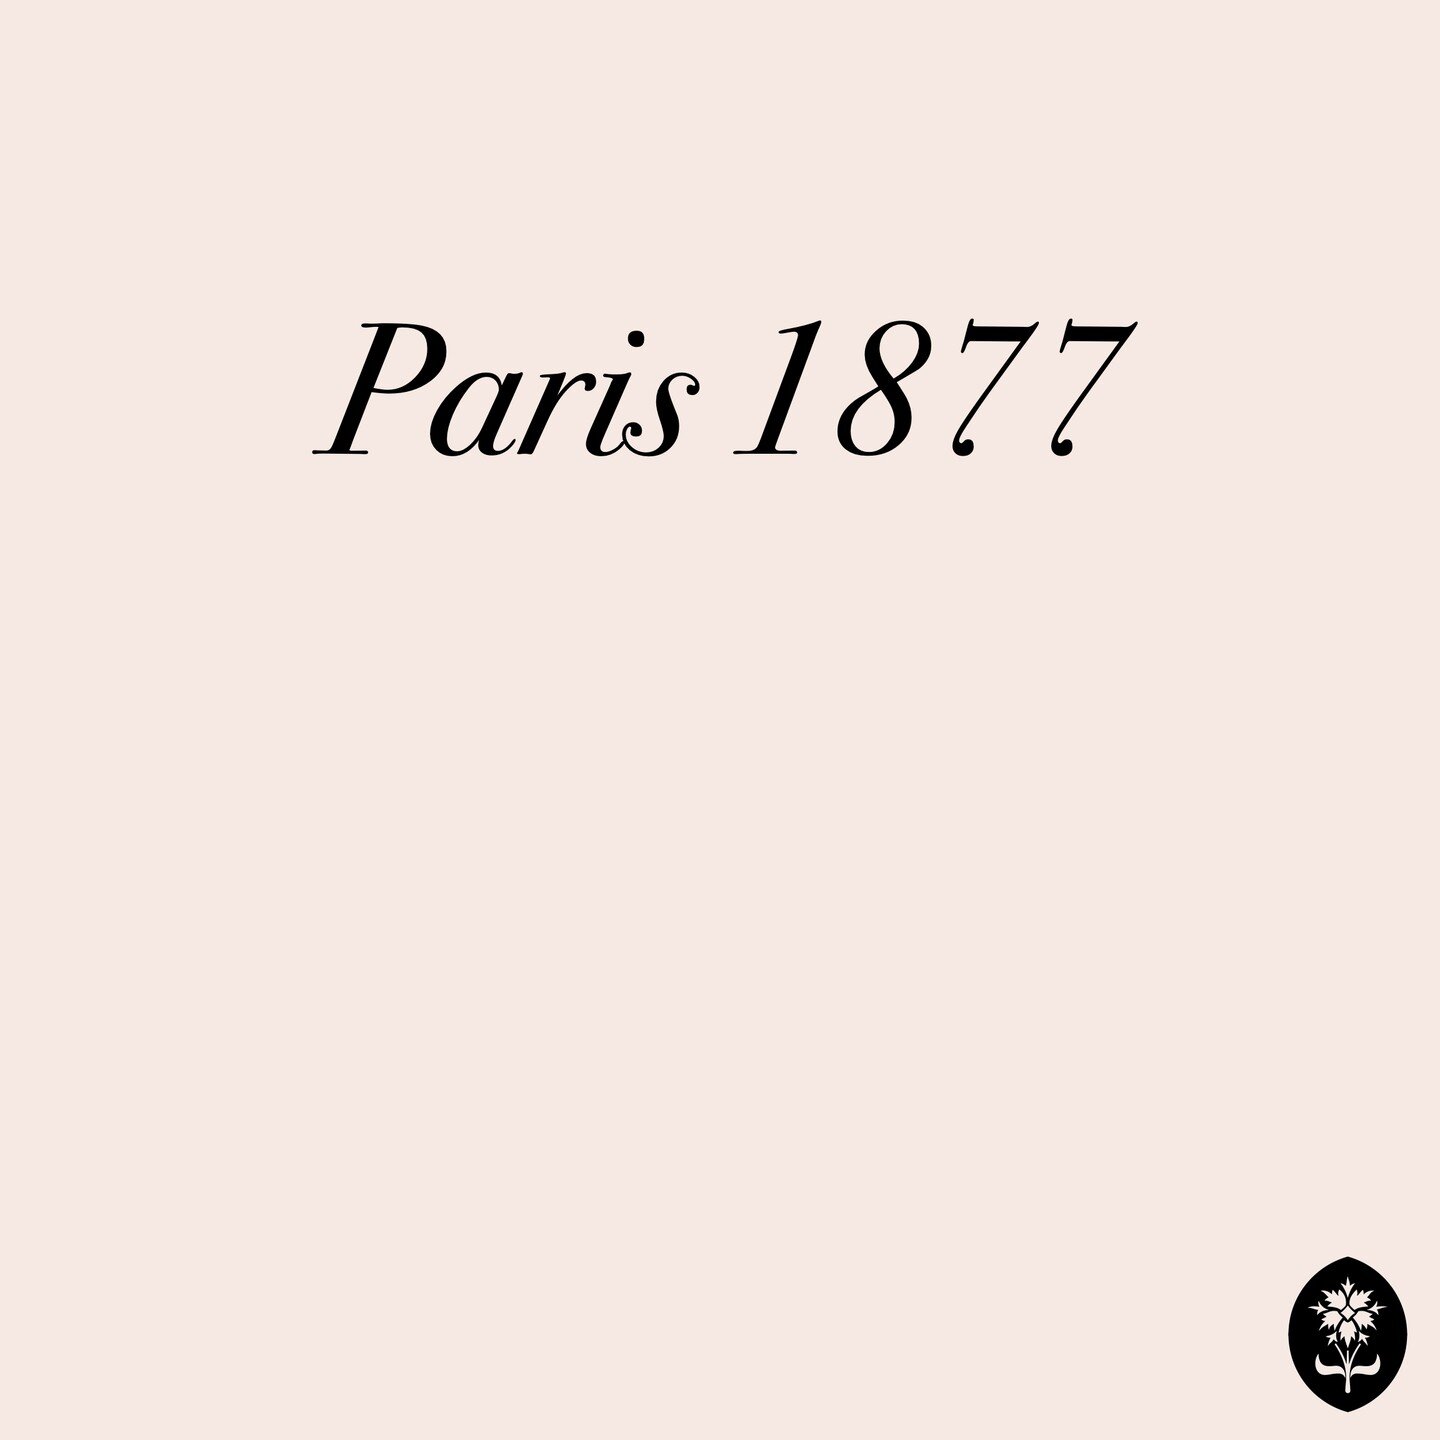 Heritage.
Future is rooted in history.

#heritage #heritagebrand #longhistory #marquehistorique #strongvalues #timeless #skincare #luxurycosmetics #madeinfrance #frenchluxury #trueluxury #since1877 #1877 #paris #🇫🇷